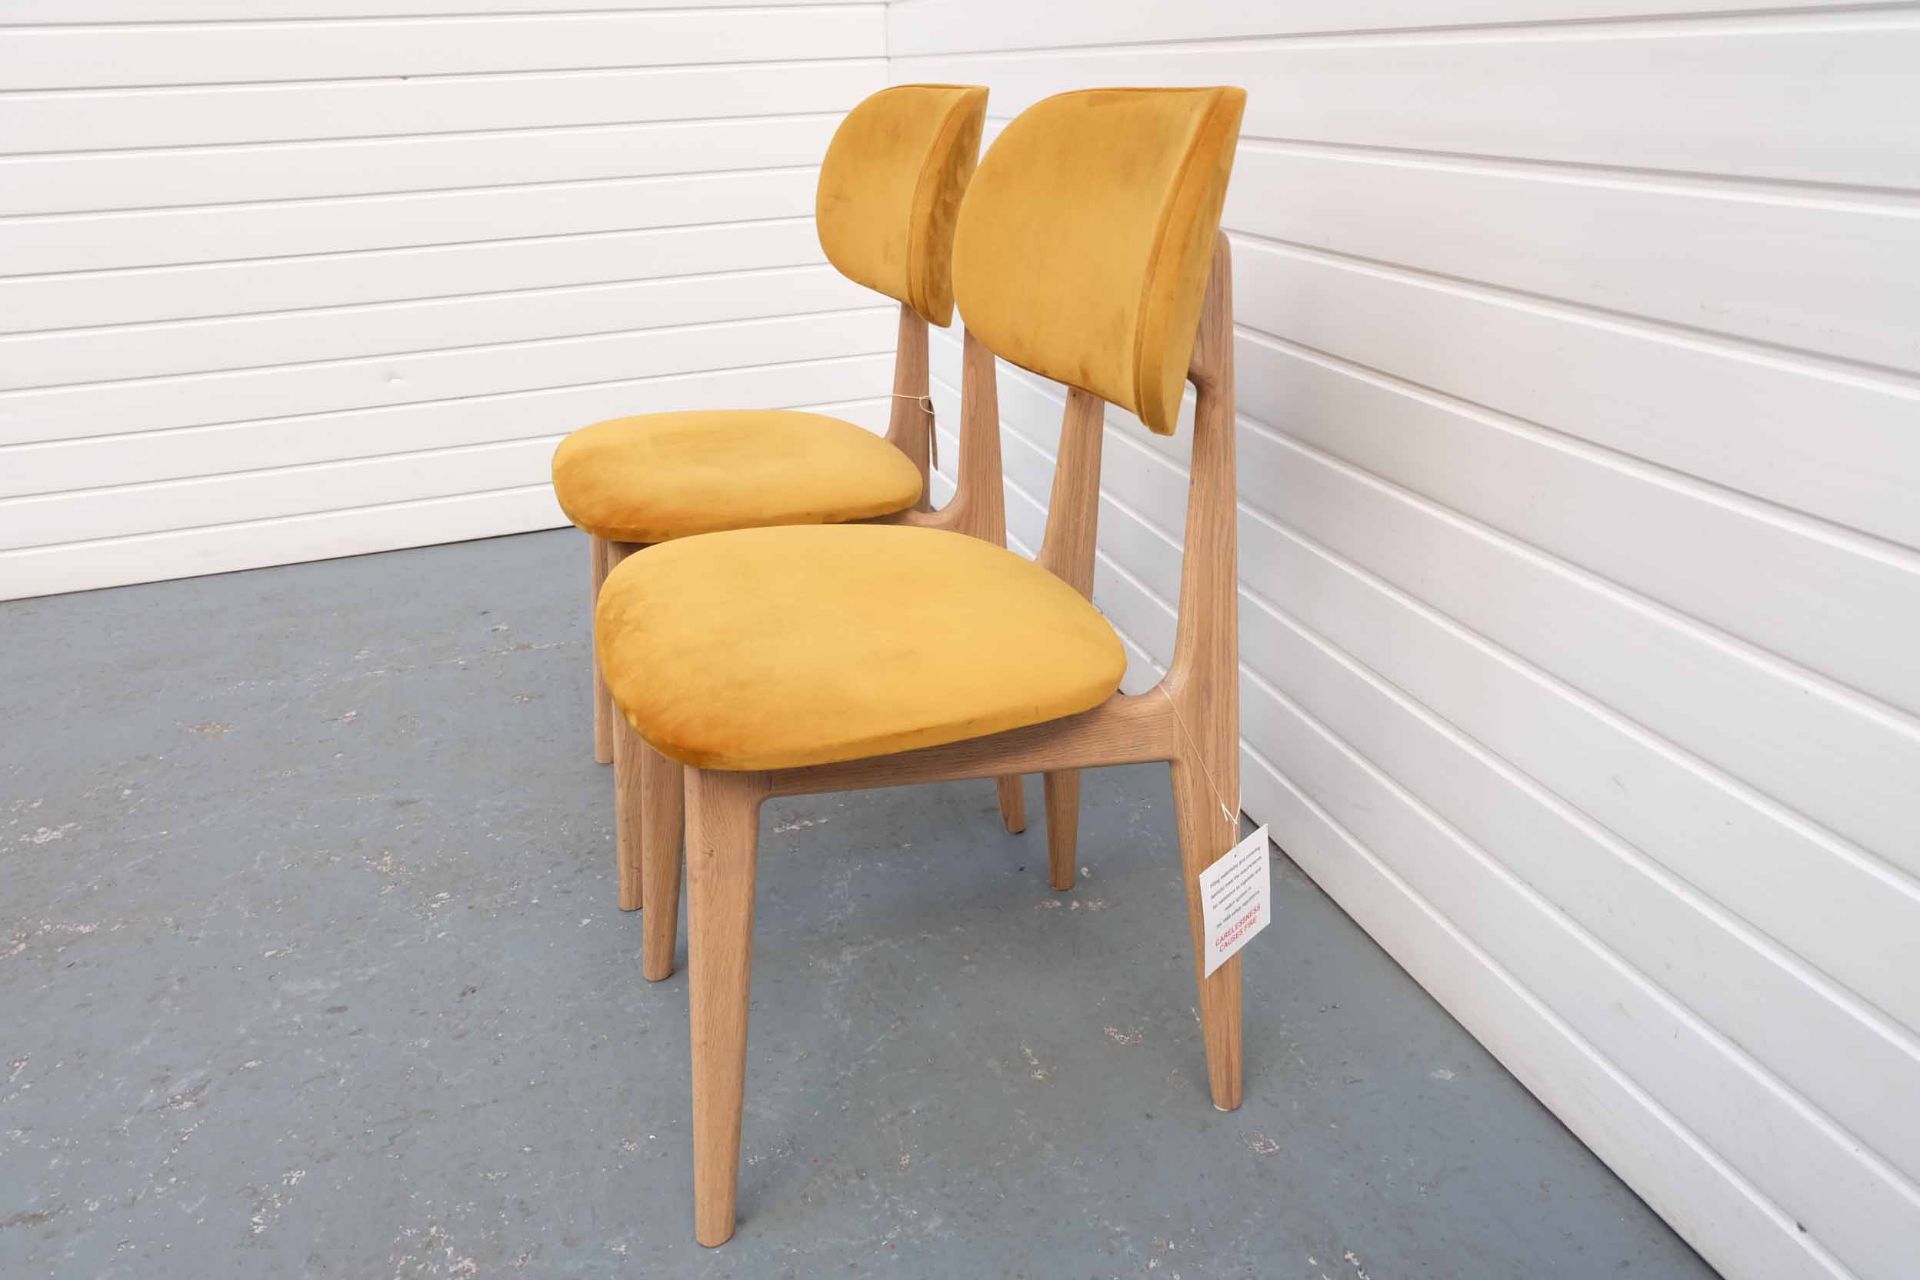 Pair of Carton Furniture 'Bari' Dining Chairs. Upholstered Seat and Back in Mustard Velvet. - Image 5 of 6